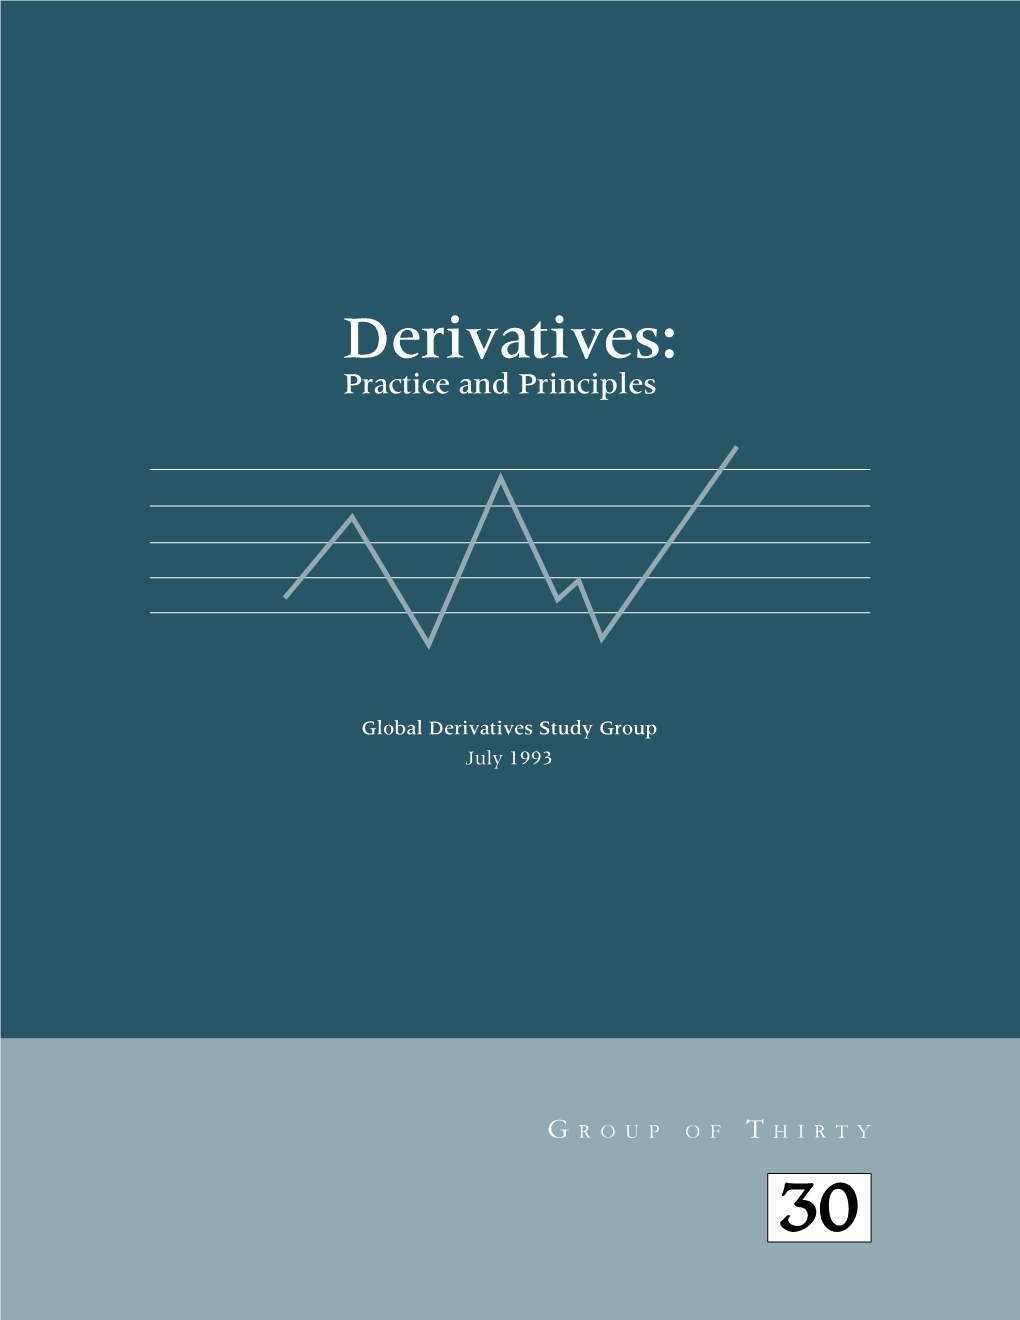 Derivatives: Practice and Principles